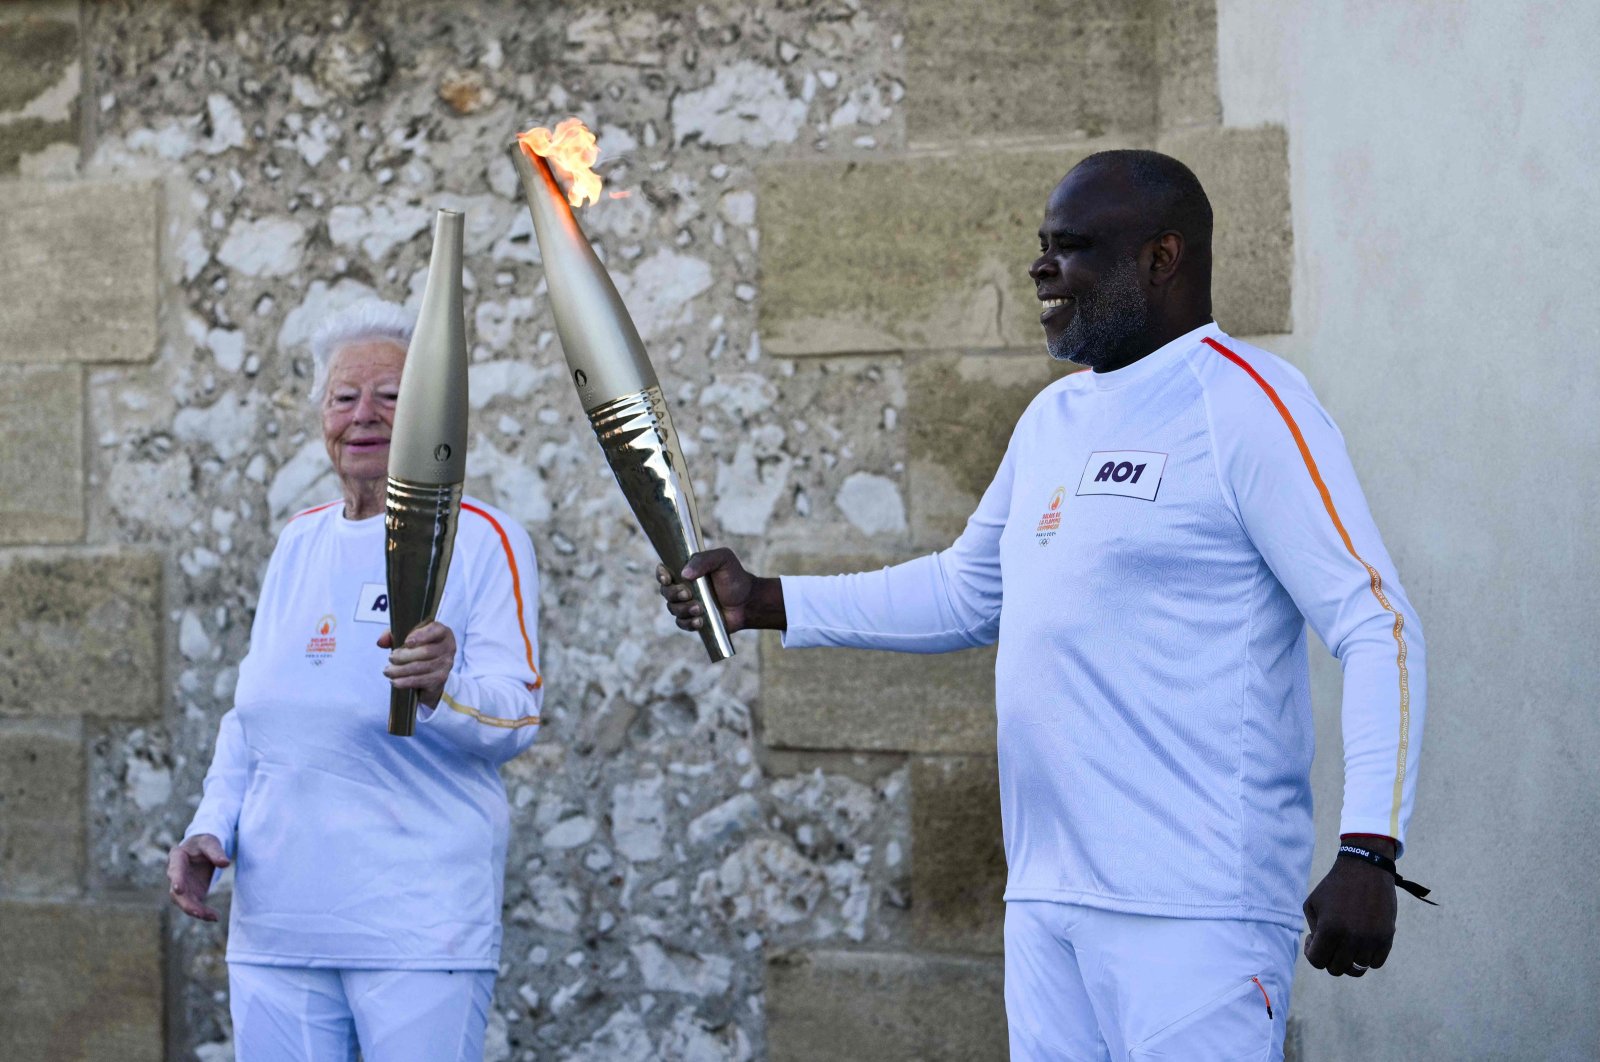 French former football player Basile Boli (R) holds the Olympic Torch and lights up the torch of French founder of Olympique de Marseille supporters club "Dodger&#039;s Marseille" Colette Cataldo as part of the Olympic and Paralympic Torch Relays at the Basilica of Notre Dame de la Garde, ahead of the Paris 2024 Olympic and Paralympic Games, Marseille, France, May 9, 2024. (AFP Photo)